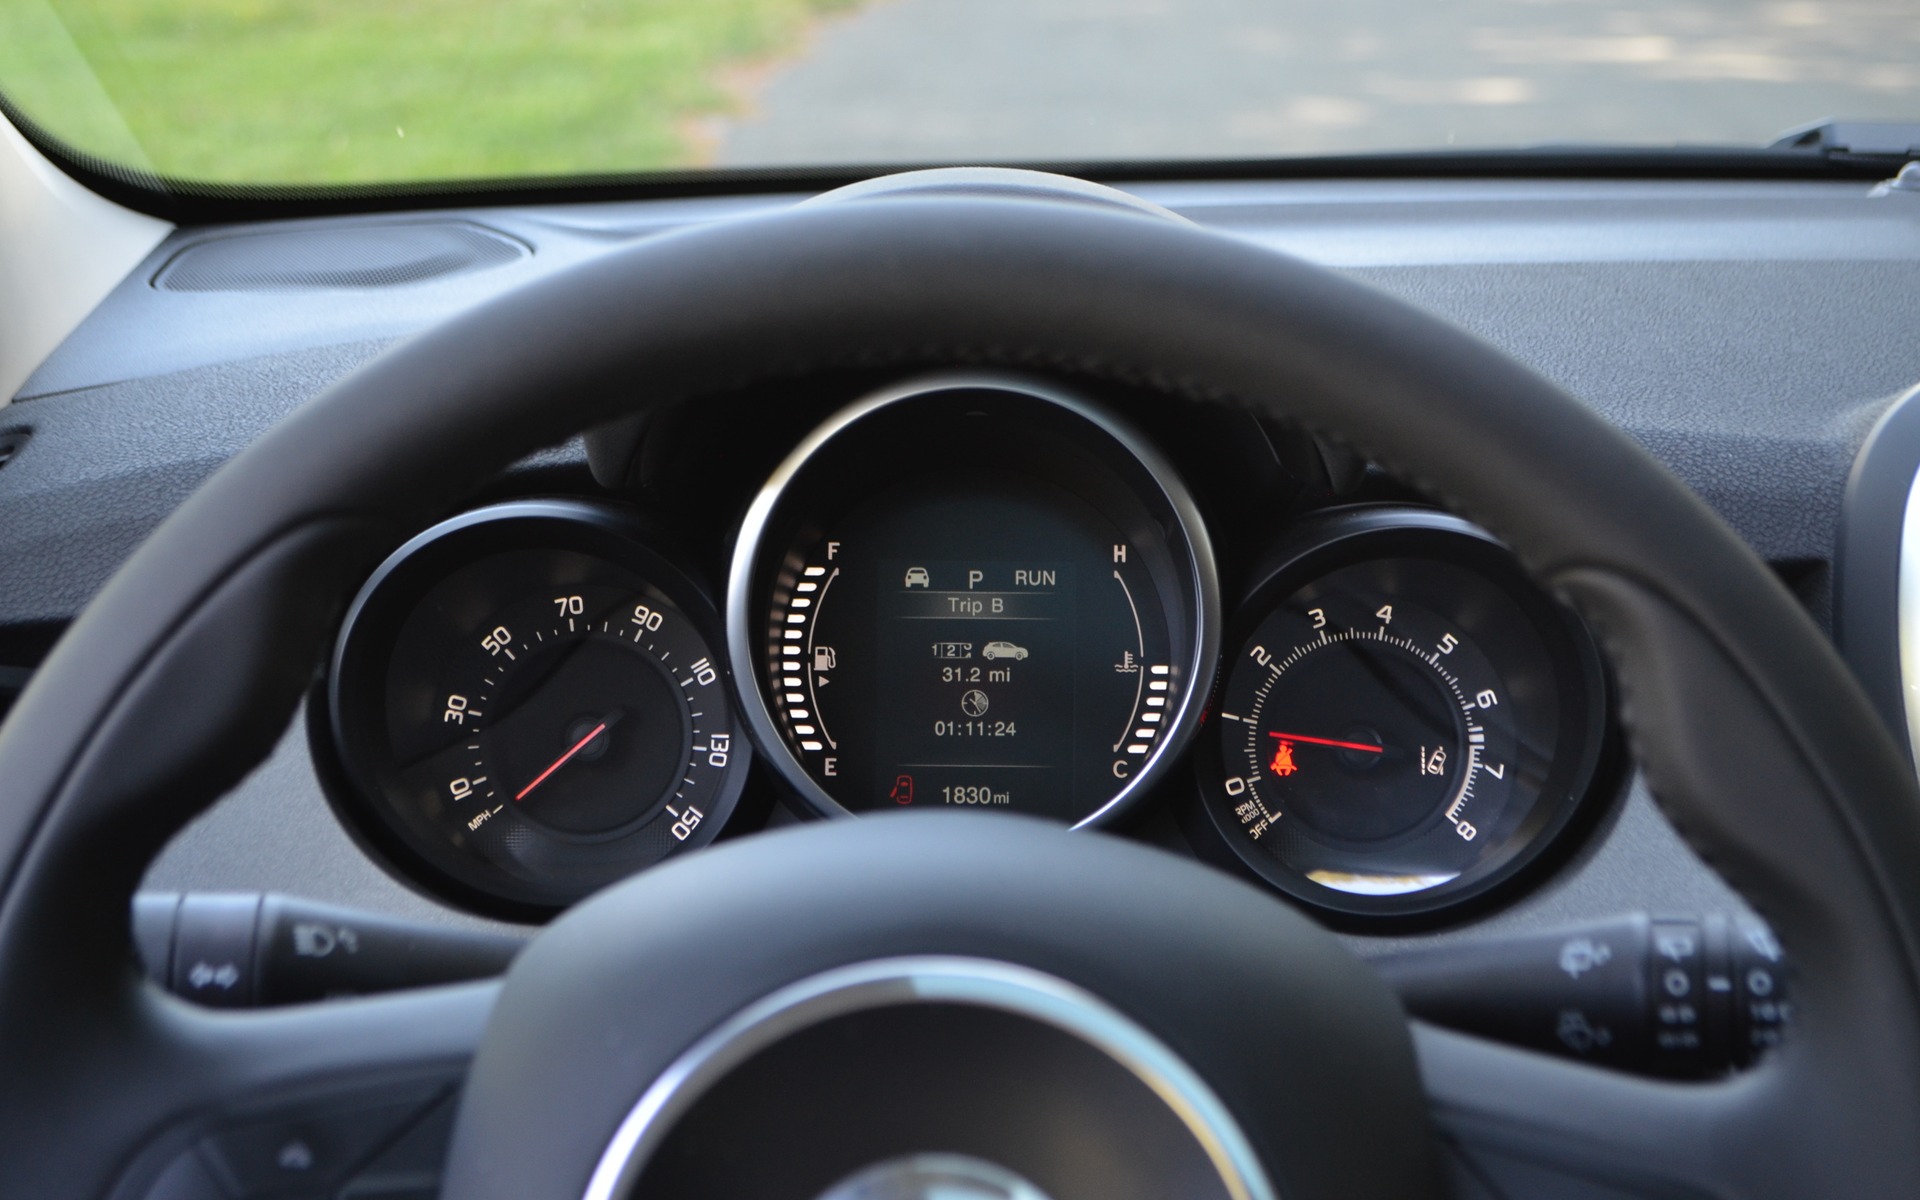 Gauges on the Trekking Plus version with a 2.4-litre engine.